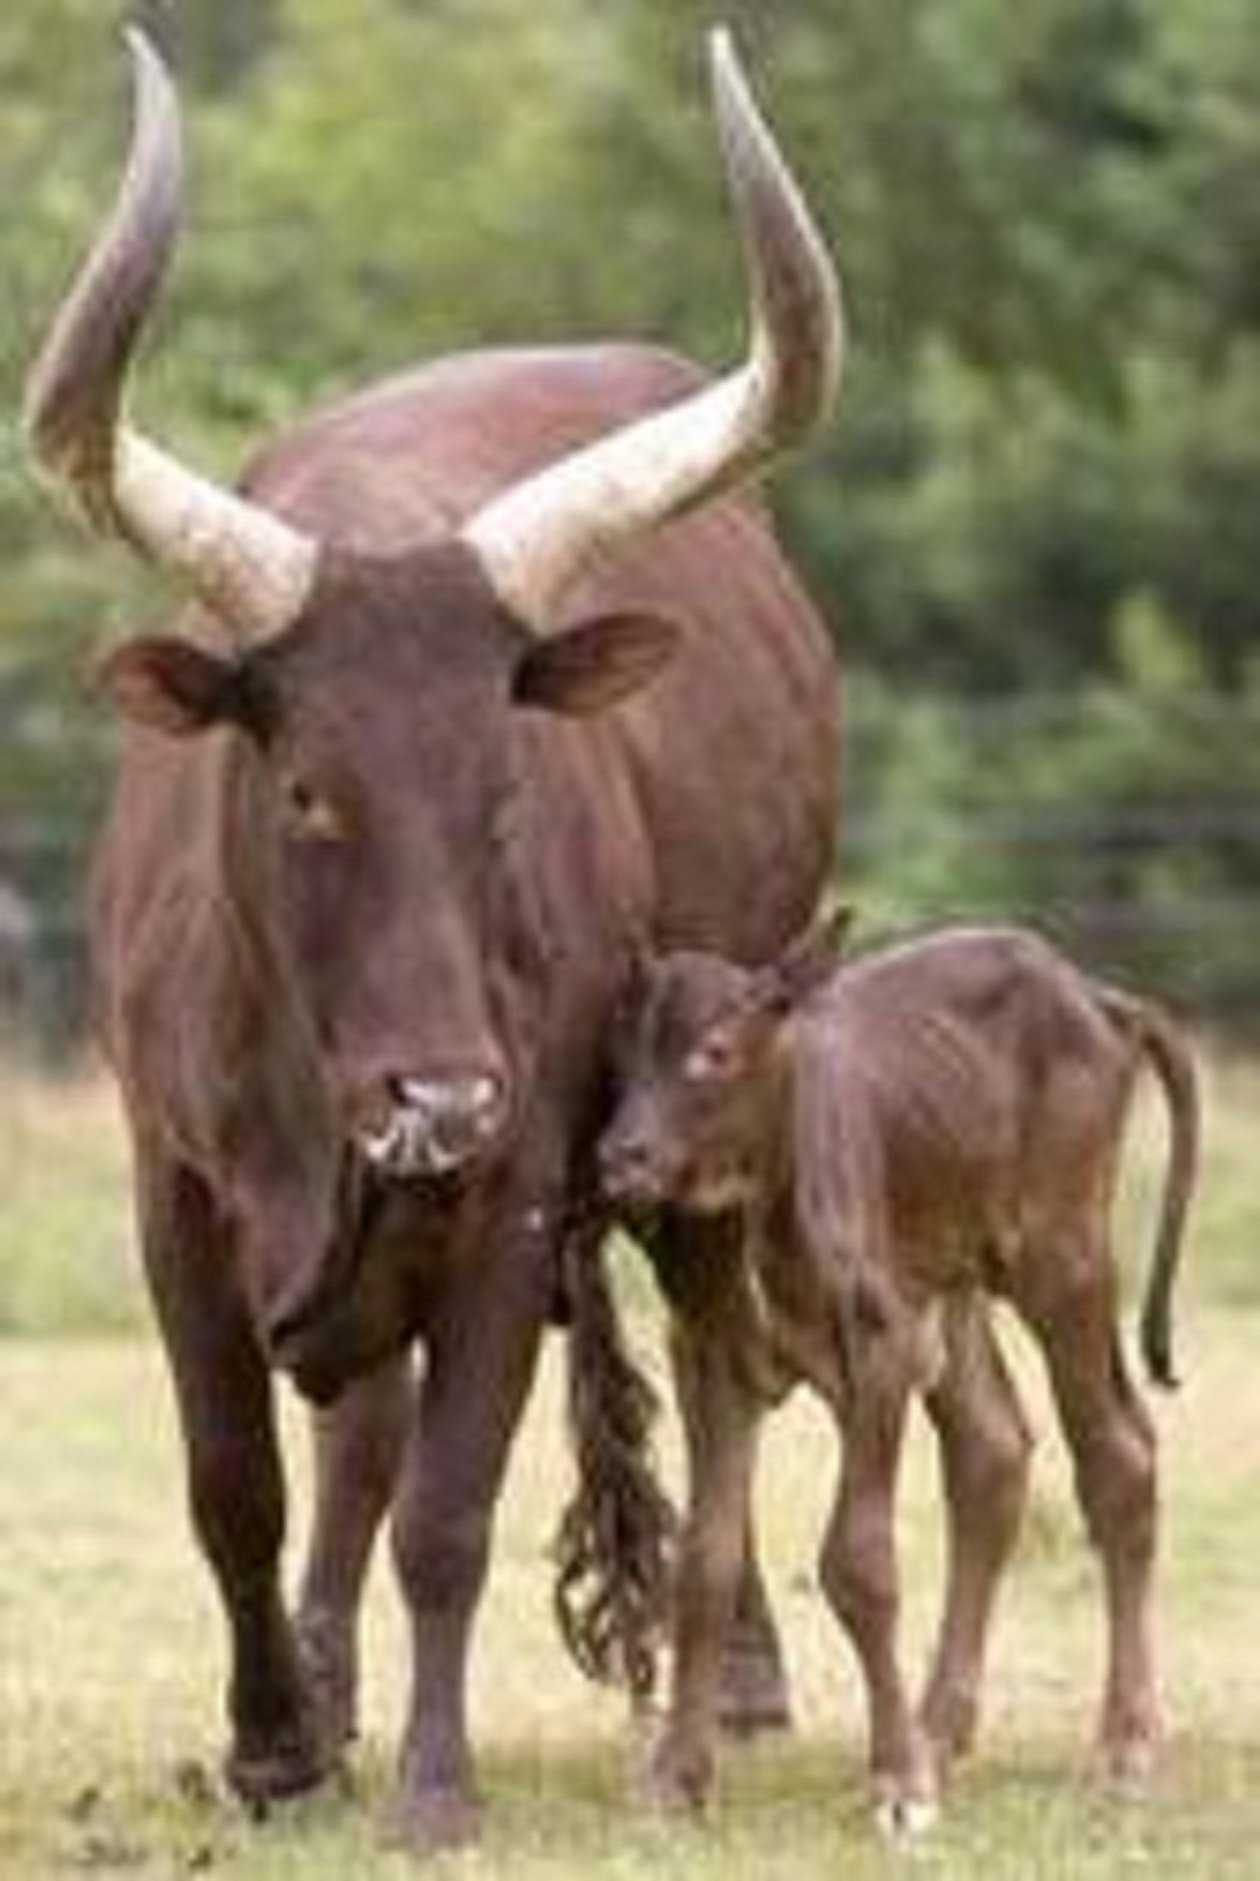 The Amazing Horns of the Ankole-Watusi Cattle